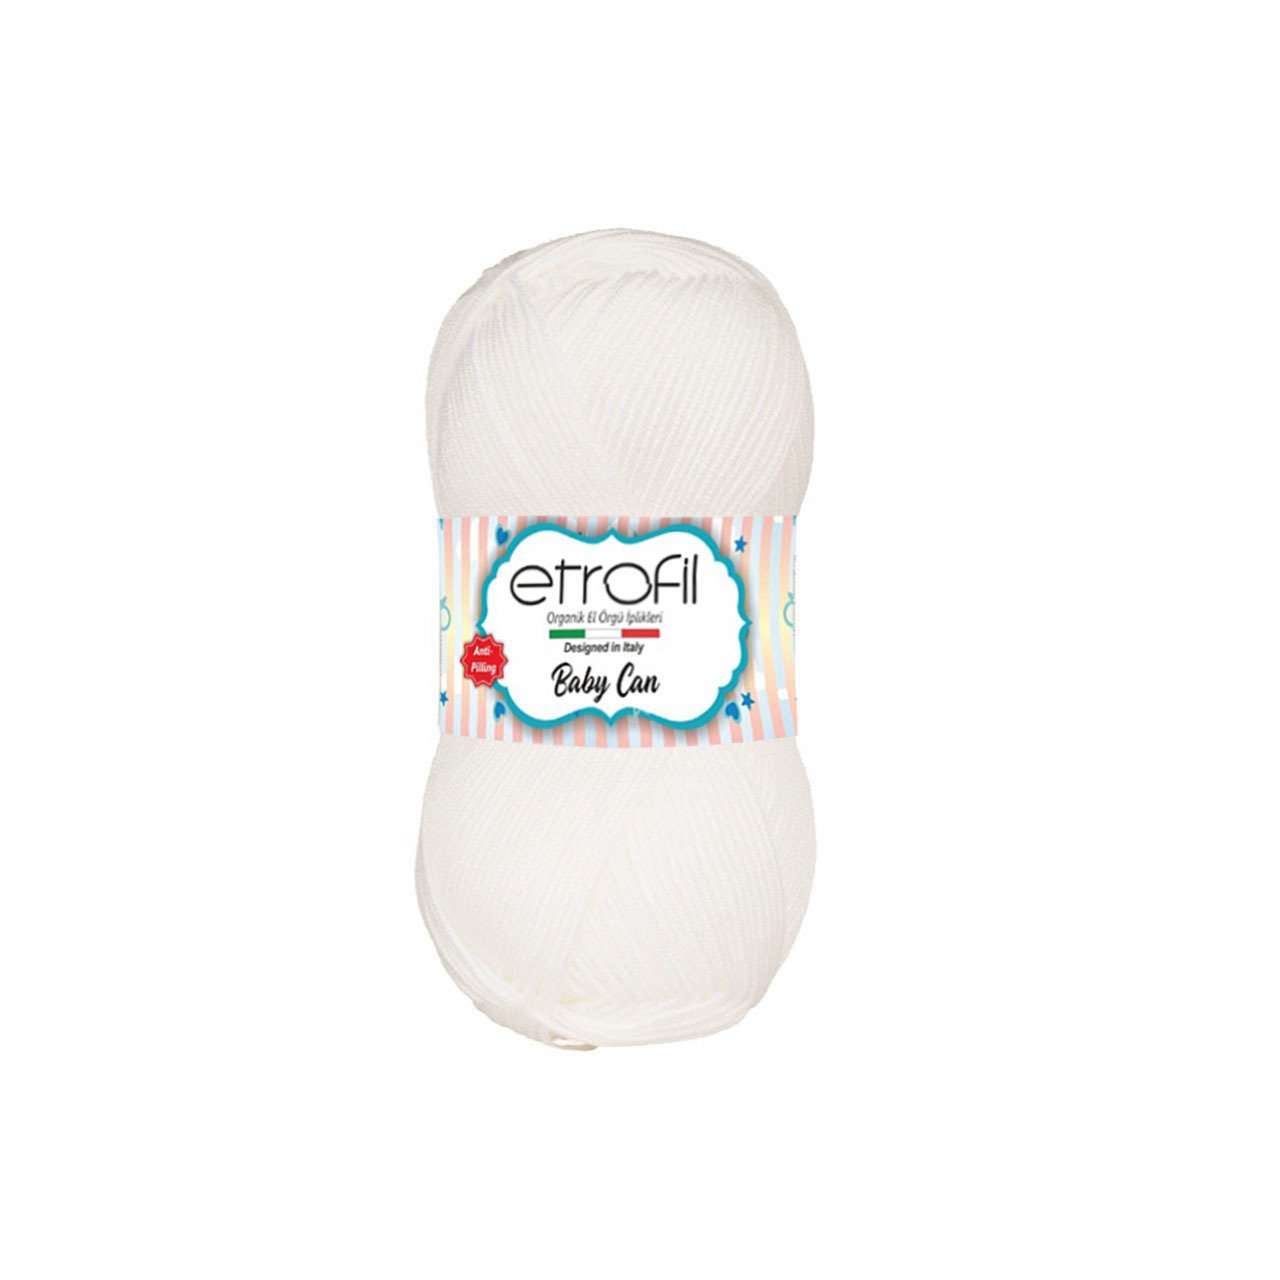 Etrofil Baby Can 80013